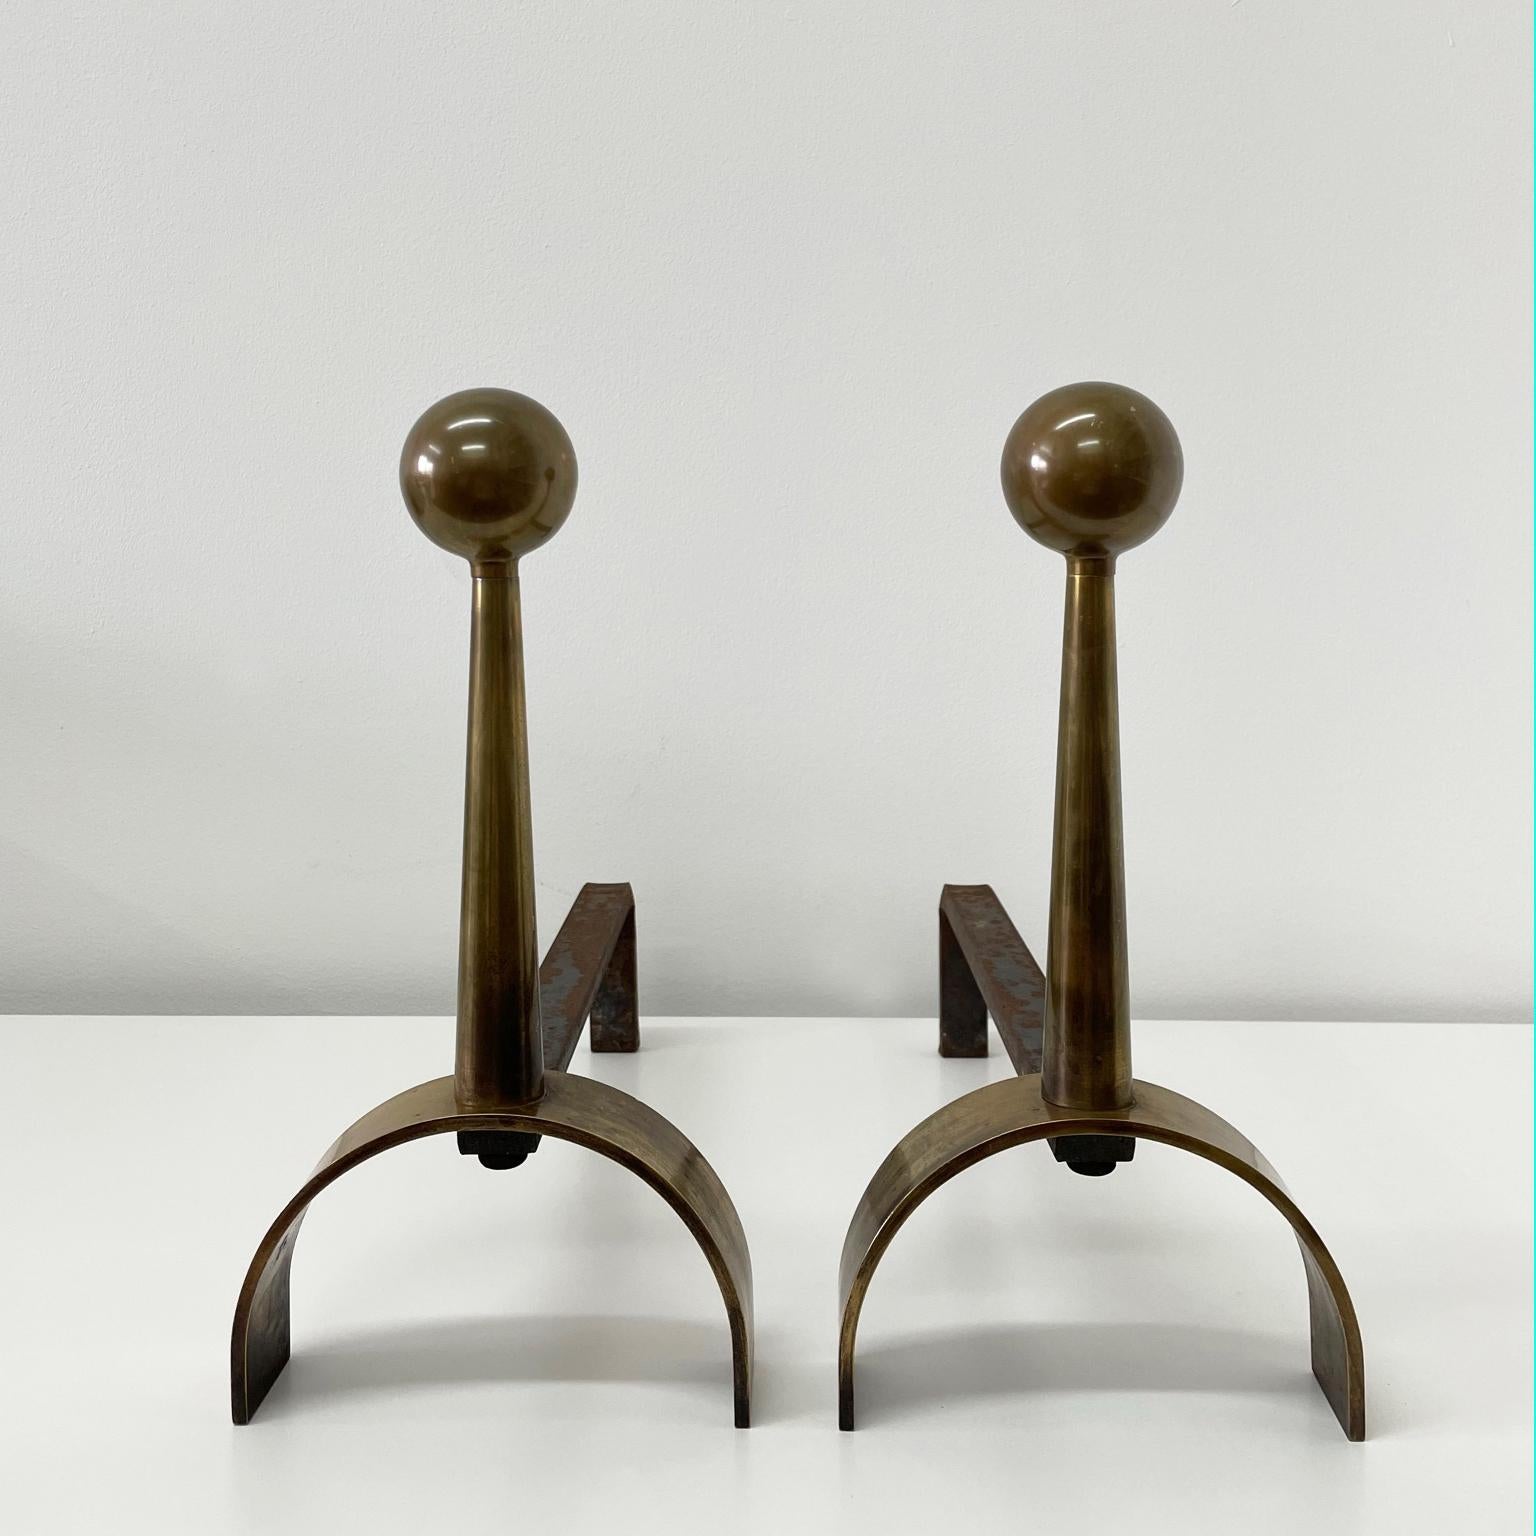 These weighty brass andirons are beautifully proportioned and show a warm patina. A graceful arch provides the base for a nicely tapered stem which terminates in a ball finial. Their pared down form is clean and unobtrusive yet with a presence all